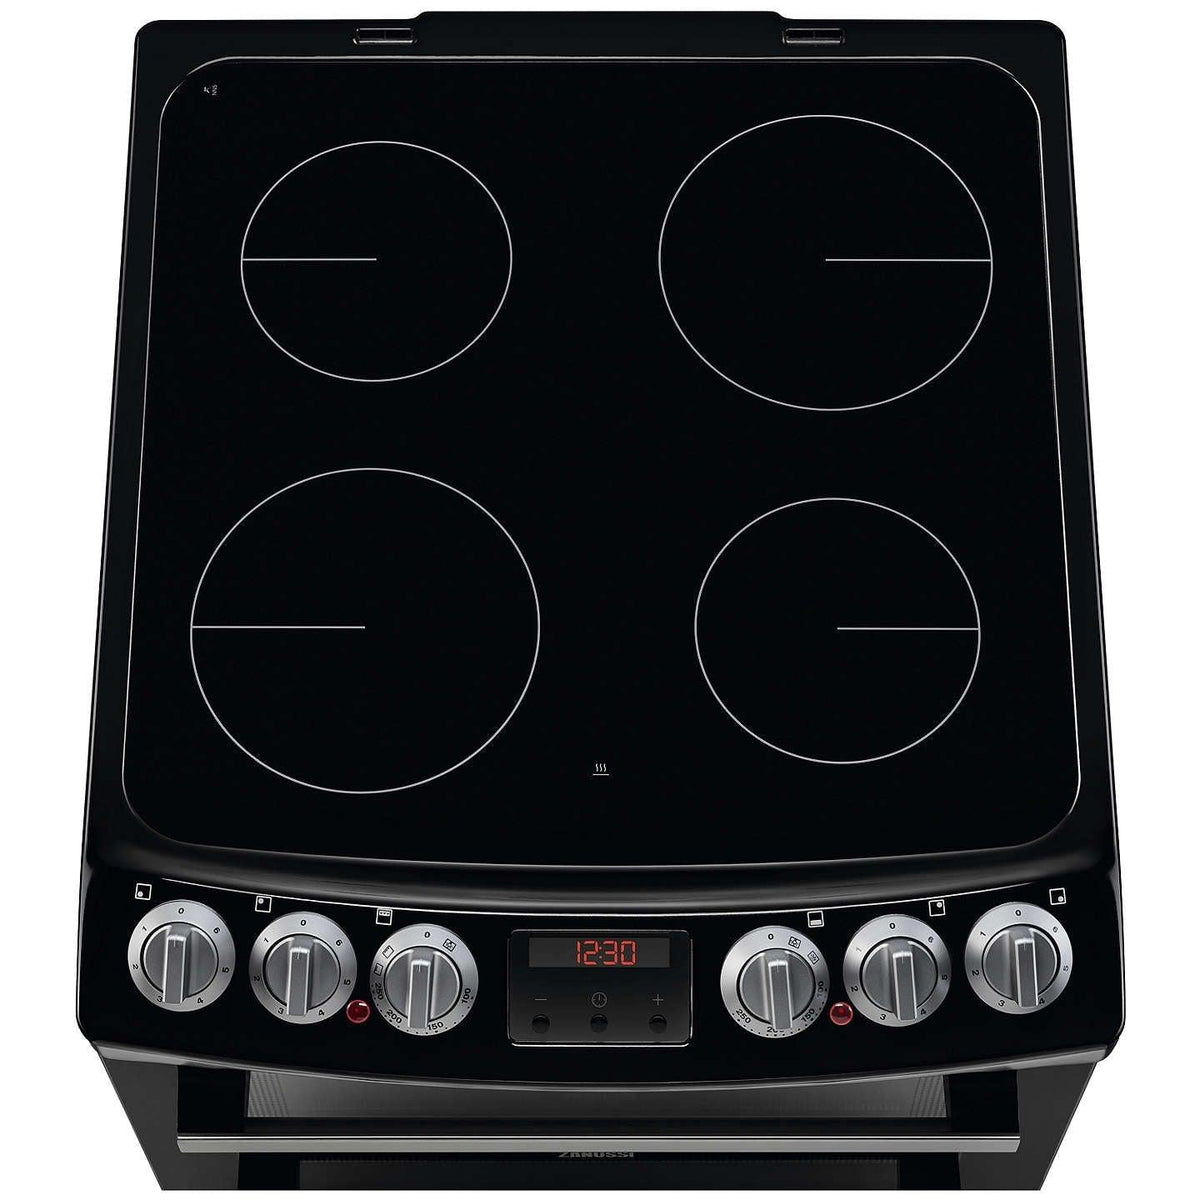 Zanussi 55cm Freestanding Electric Cooker - Stainless Steel | ZCV46250XA from DID Electrical - guaranteed Irish, guaranteed quality service. (6890788061372)